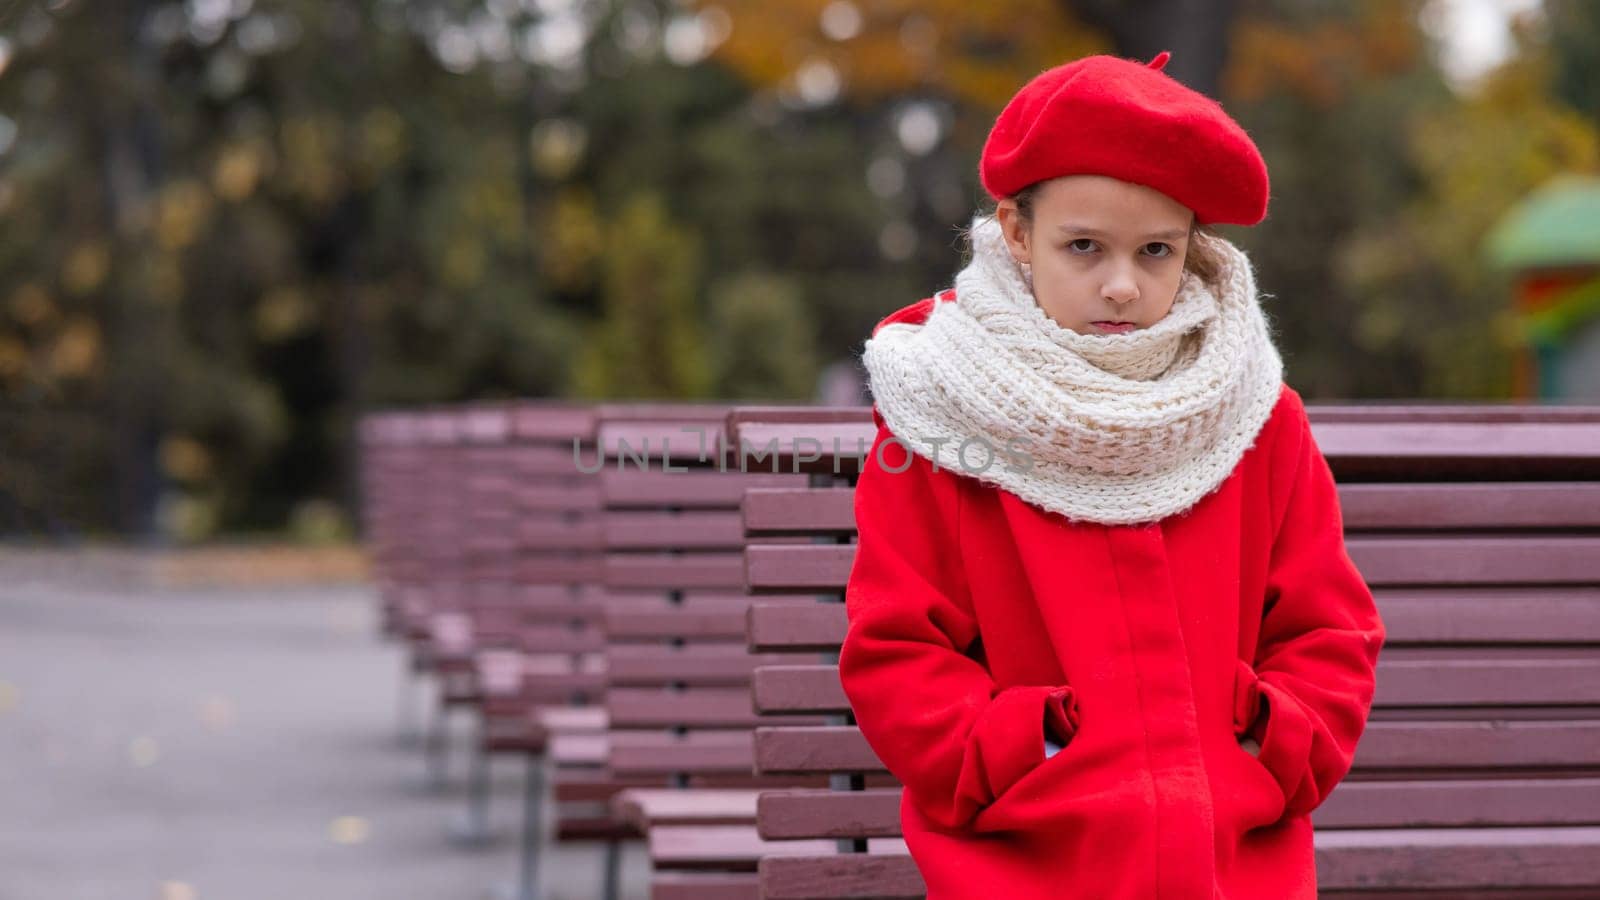 A sad Caucasian girl in a red coat and a beret sits alone on a bench